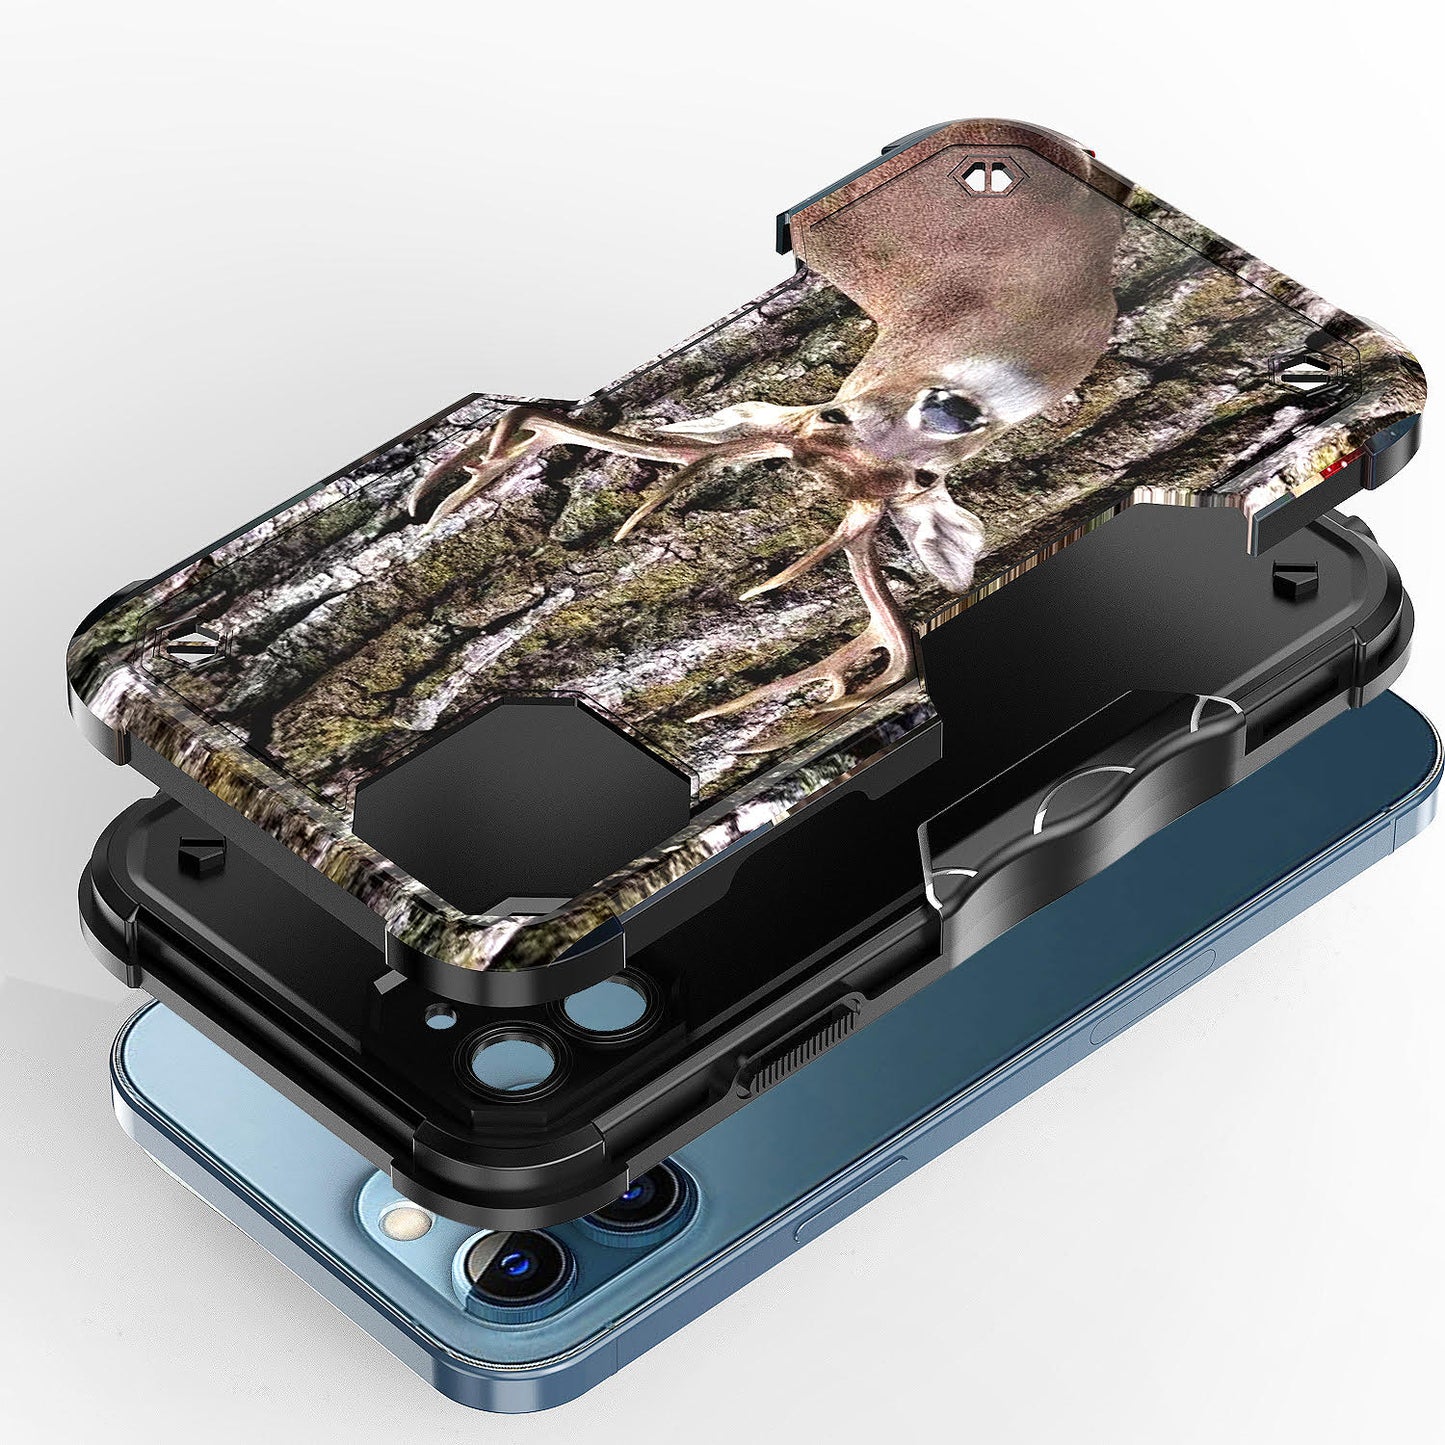 Case For Apple iPhone 12 Pro Max - Hybrid Grip Design Shockproof Phone Cover - Whitetail Buck